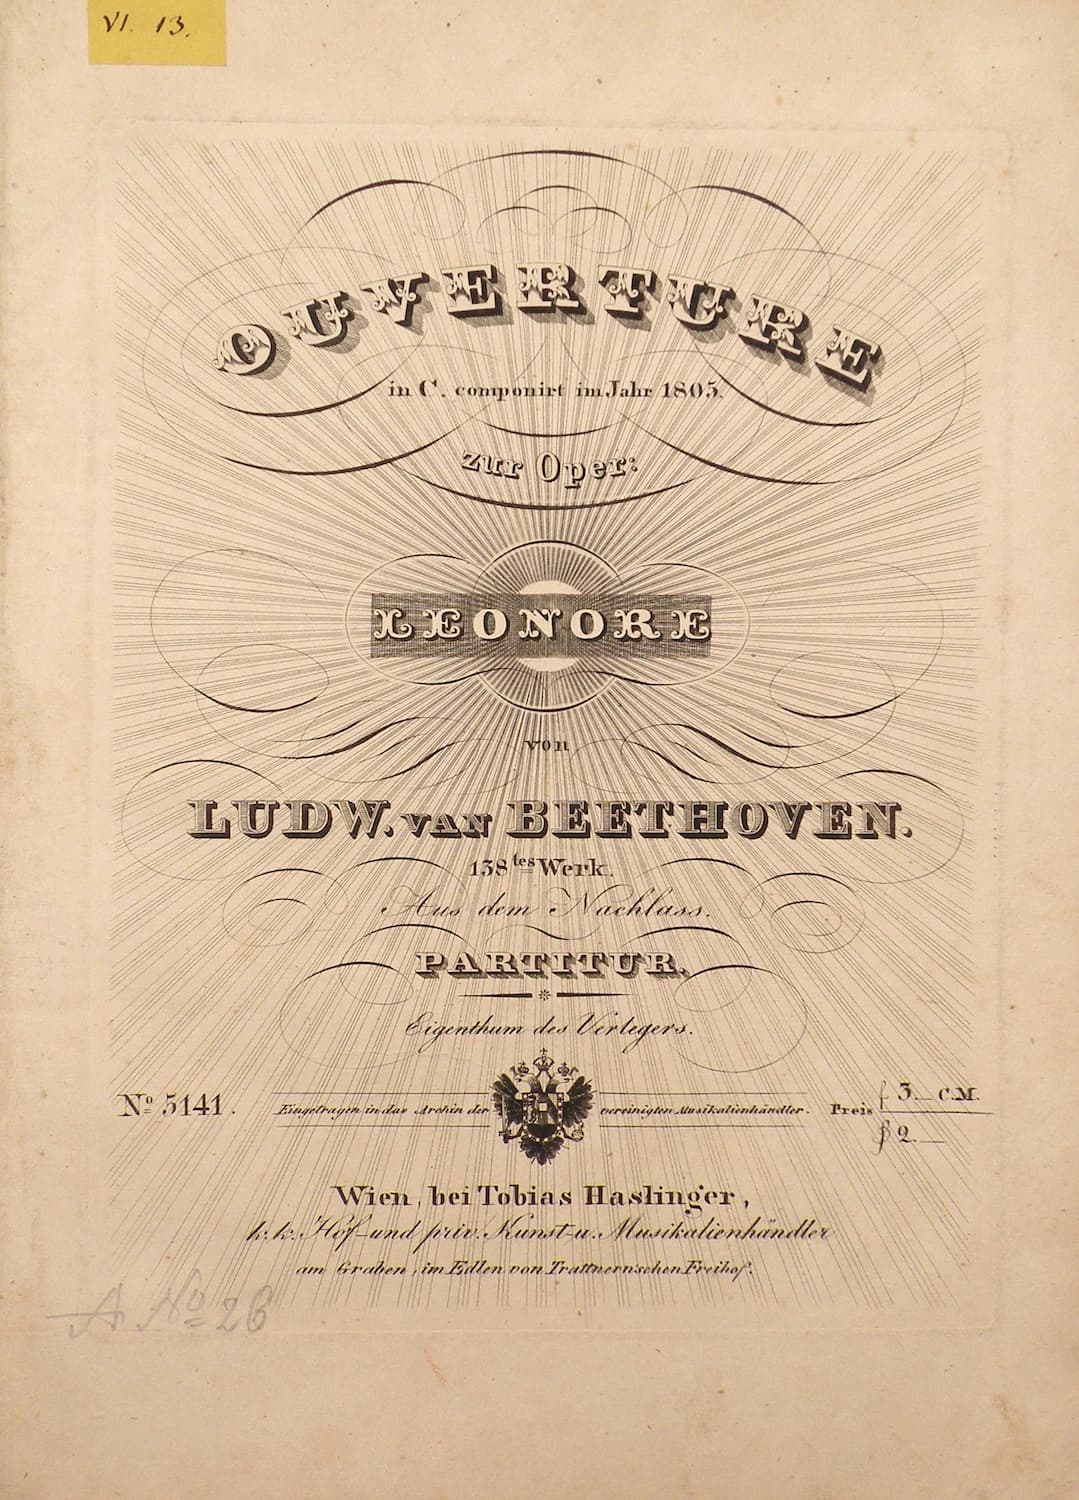 Beethoven's Leonore Overture No. 1 Op. 138 score cover